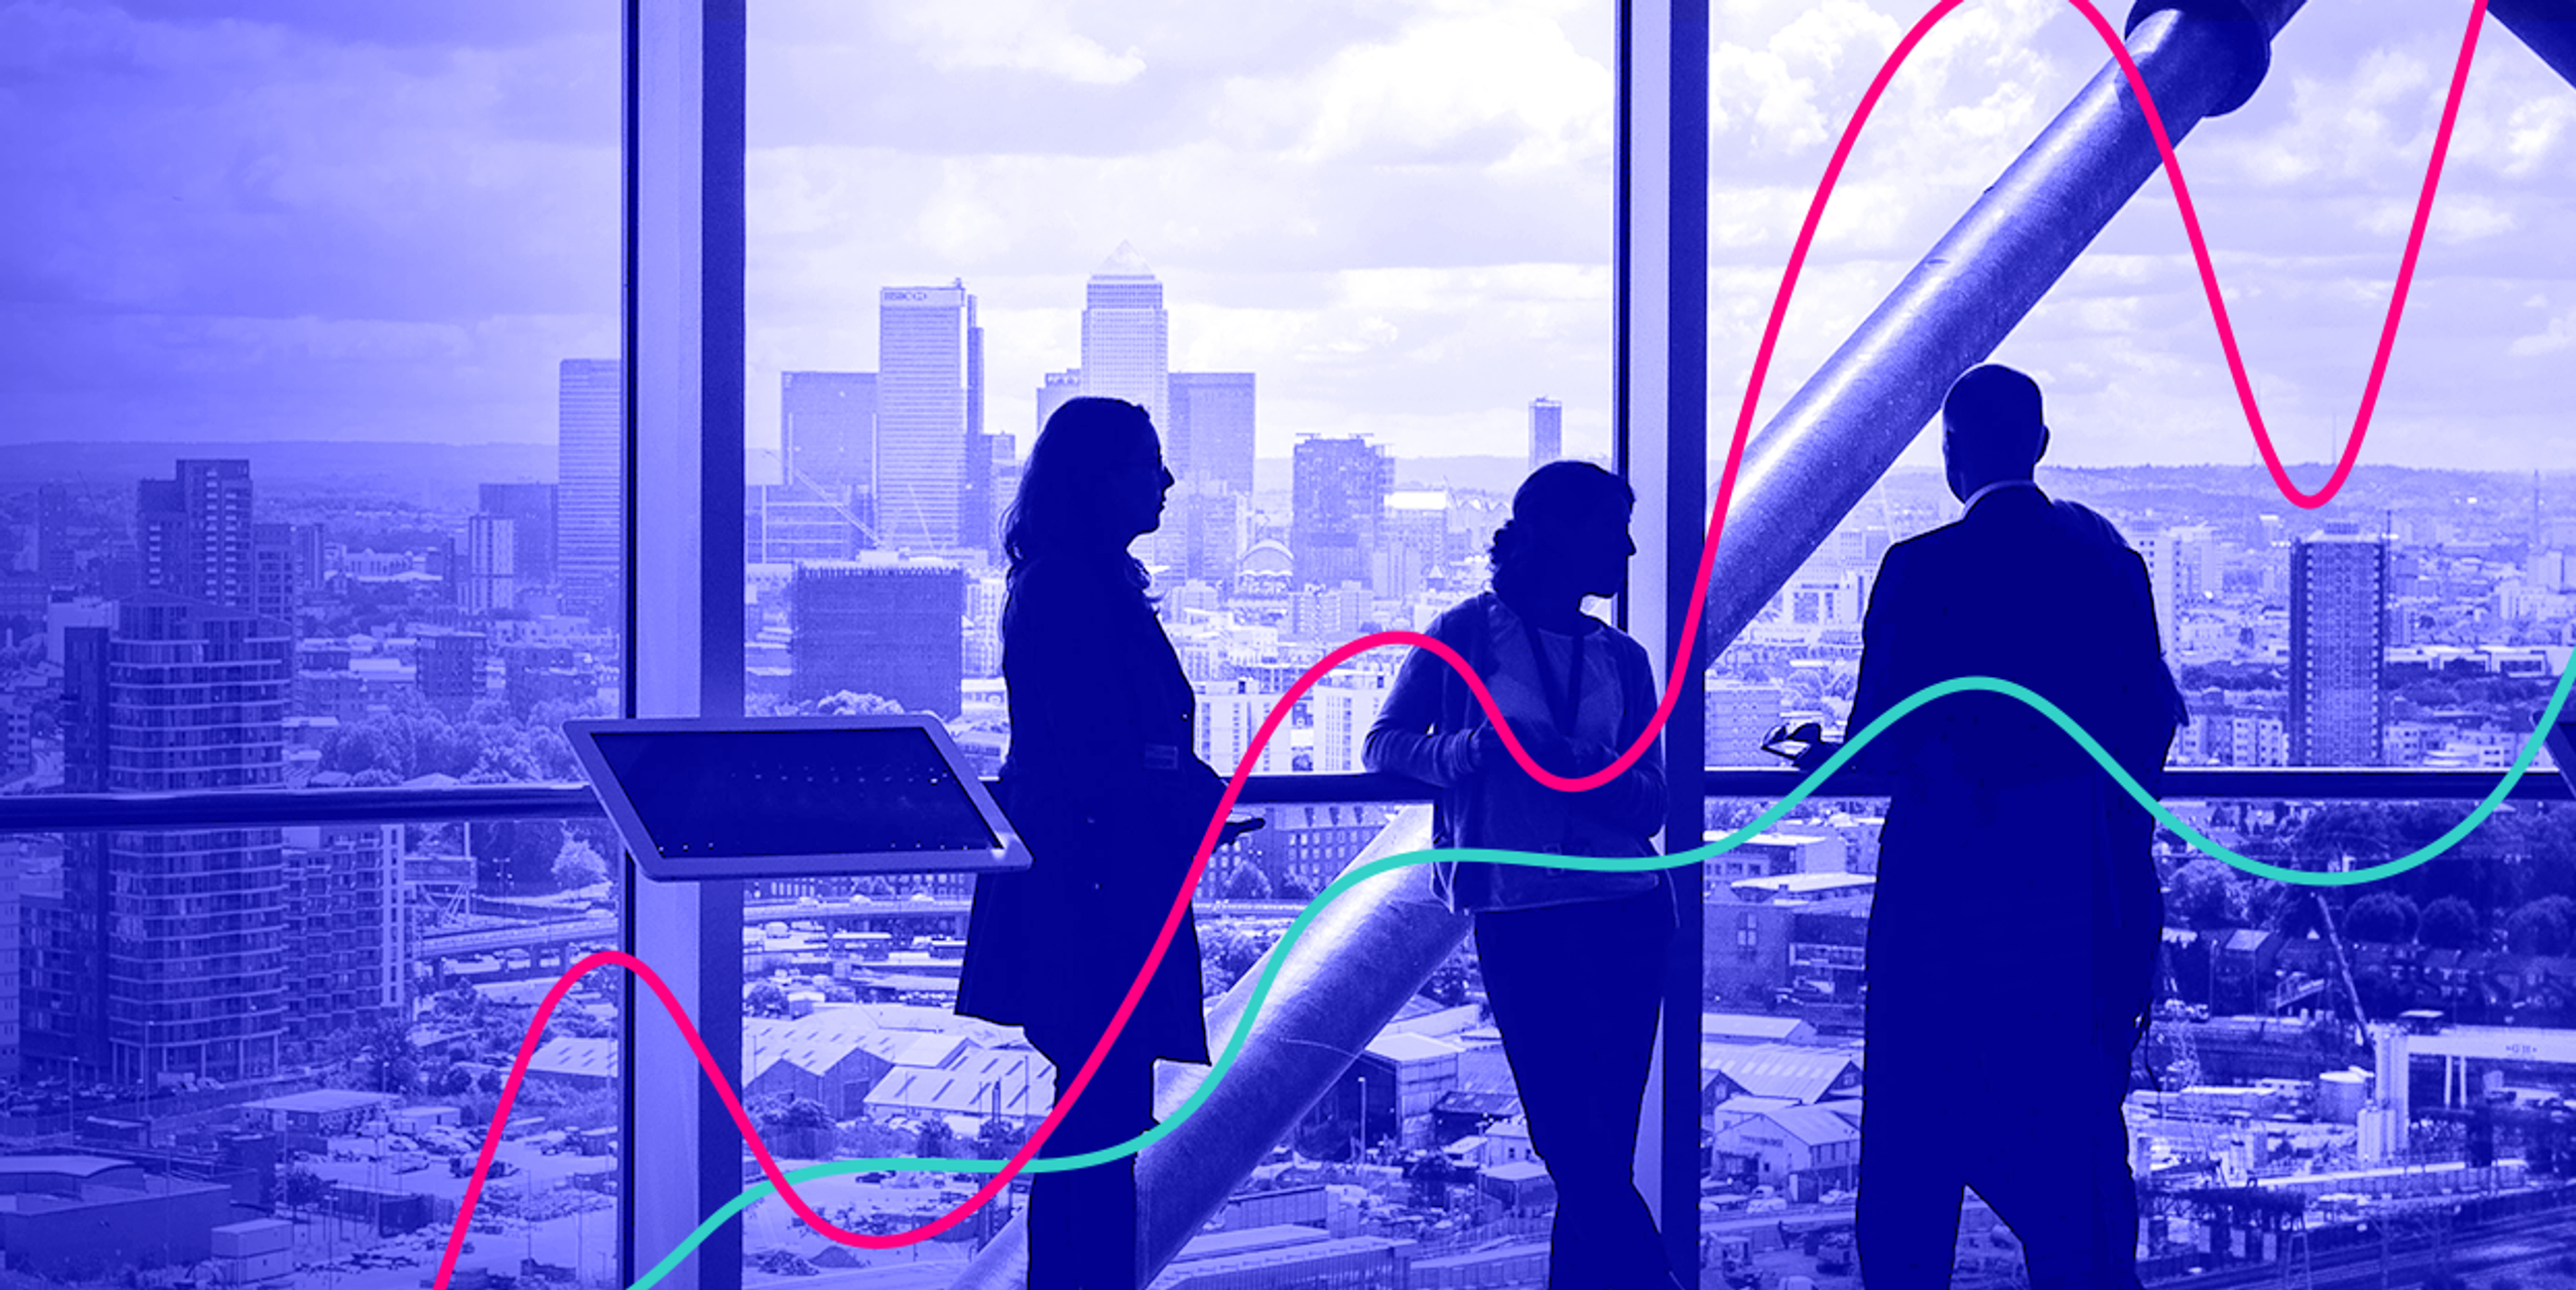 Coworkers looking out over a city landscape with an illustration of a chart imposed on top of them